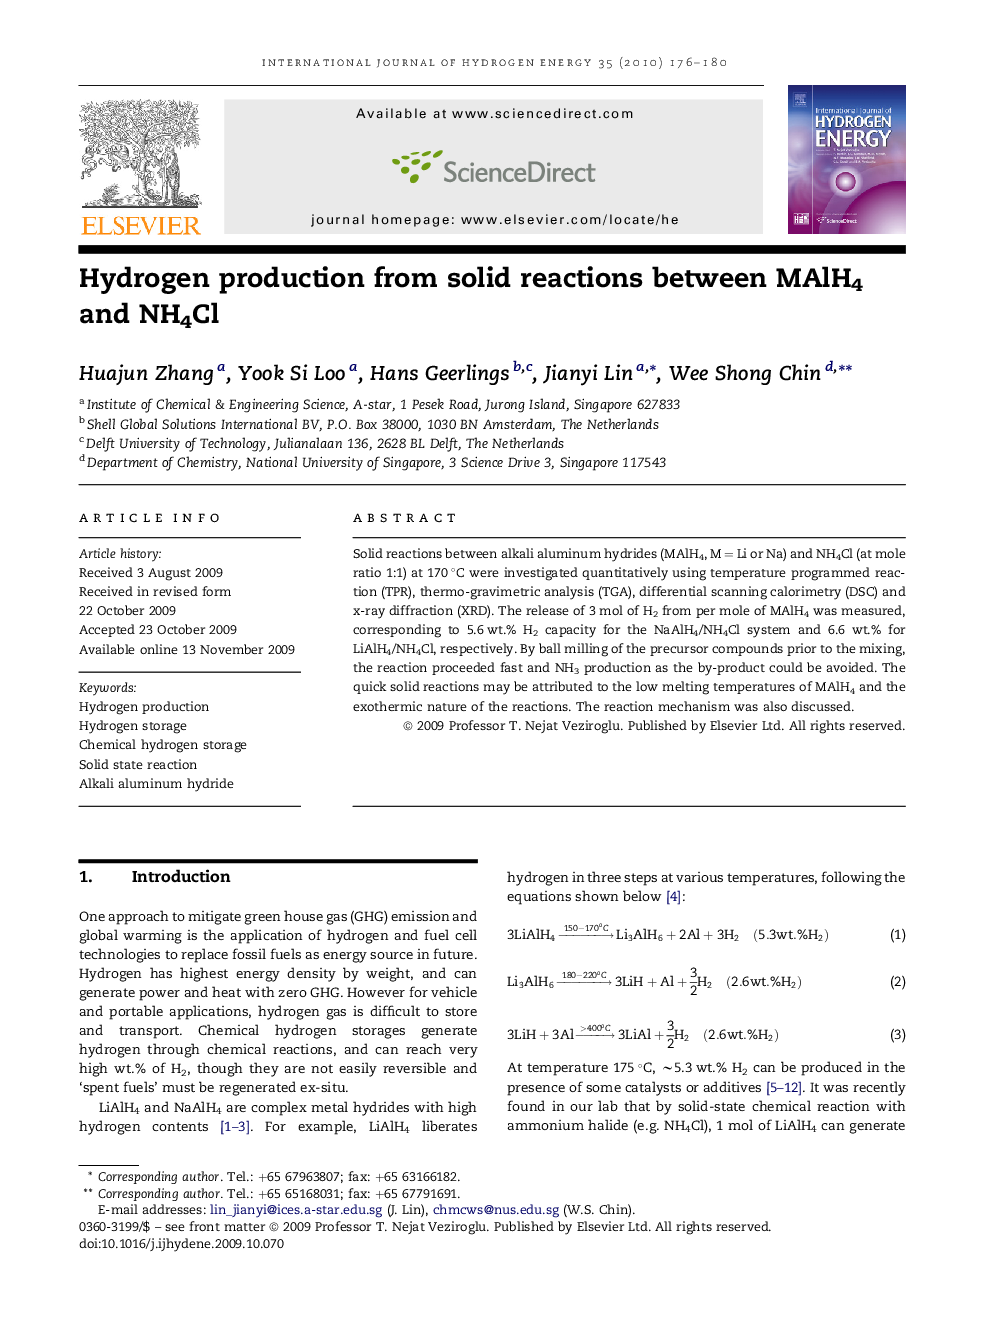 Hydrogen production from solid reactions between MAlH4 and NH4Cl